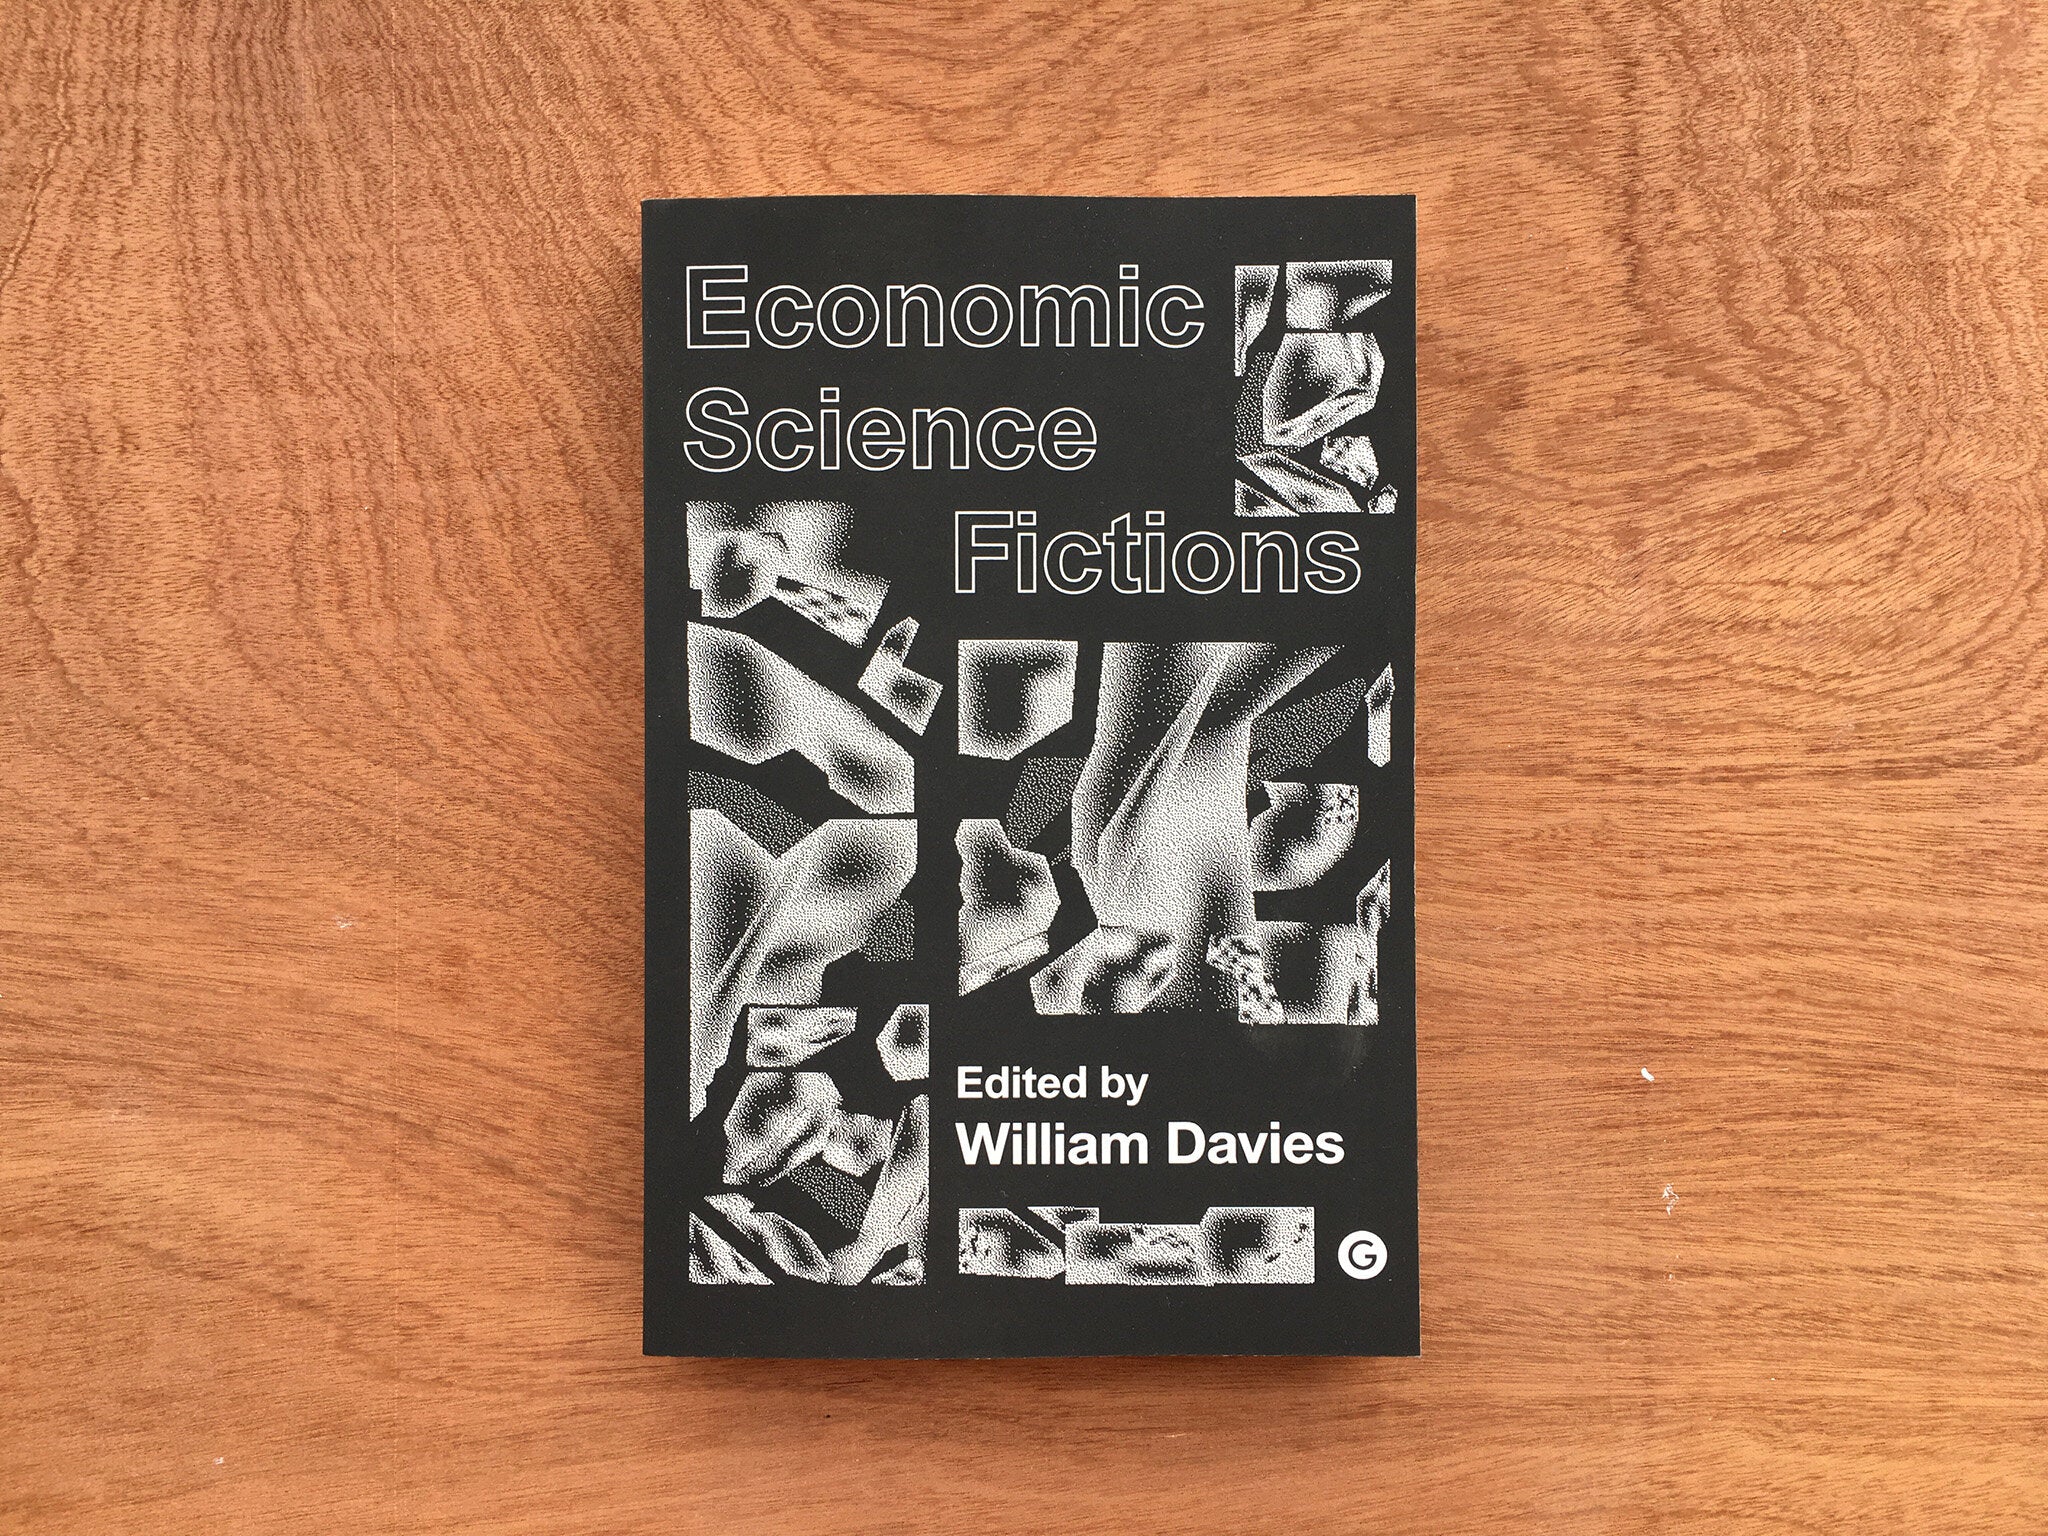 ECONOMIC SCIENCE FICTIONS edited by William Davies